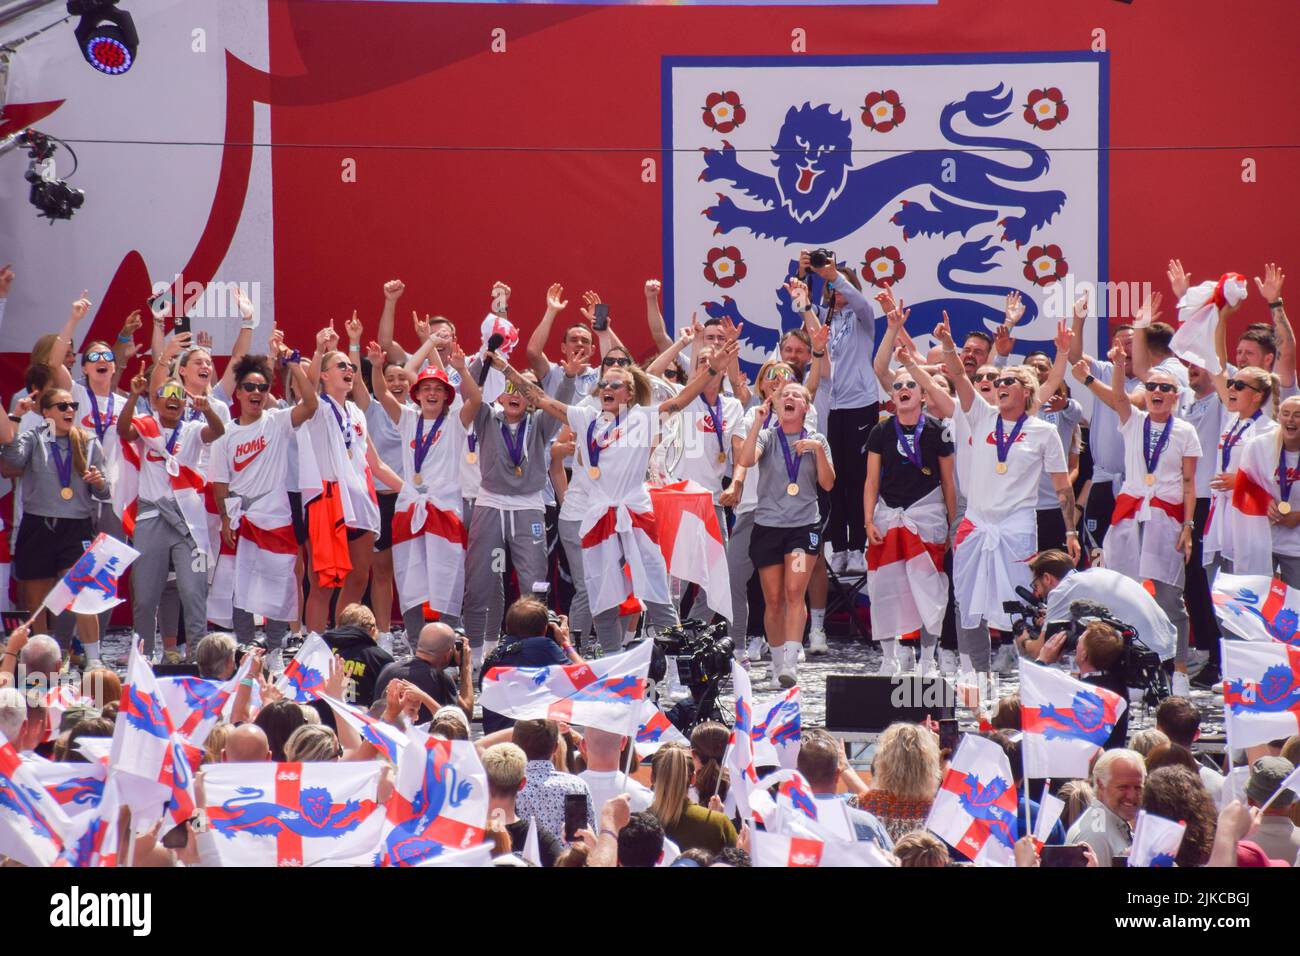 London, UK. 1st August 2022. The Lionesses celebrate on stage. Thousands of people gathered in Trafalgar Square to celebrate the England team - the Lionesses -  winning Women's Euro 2022 football tournament. Credit: Vuk Valcic/Alamy Live News Stock Photo